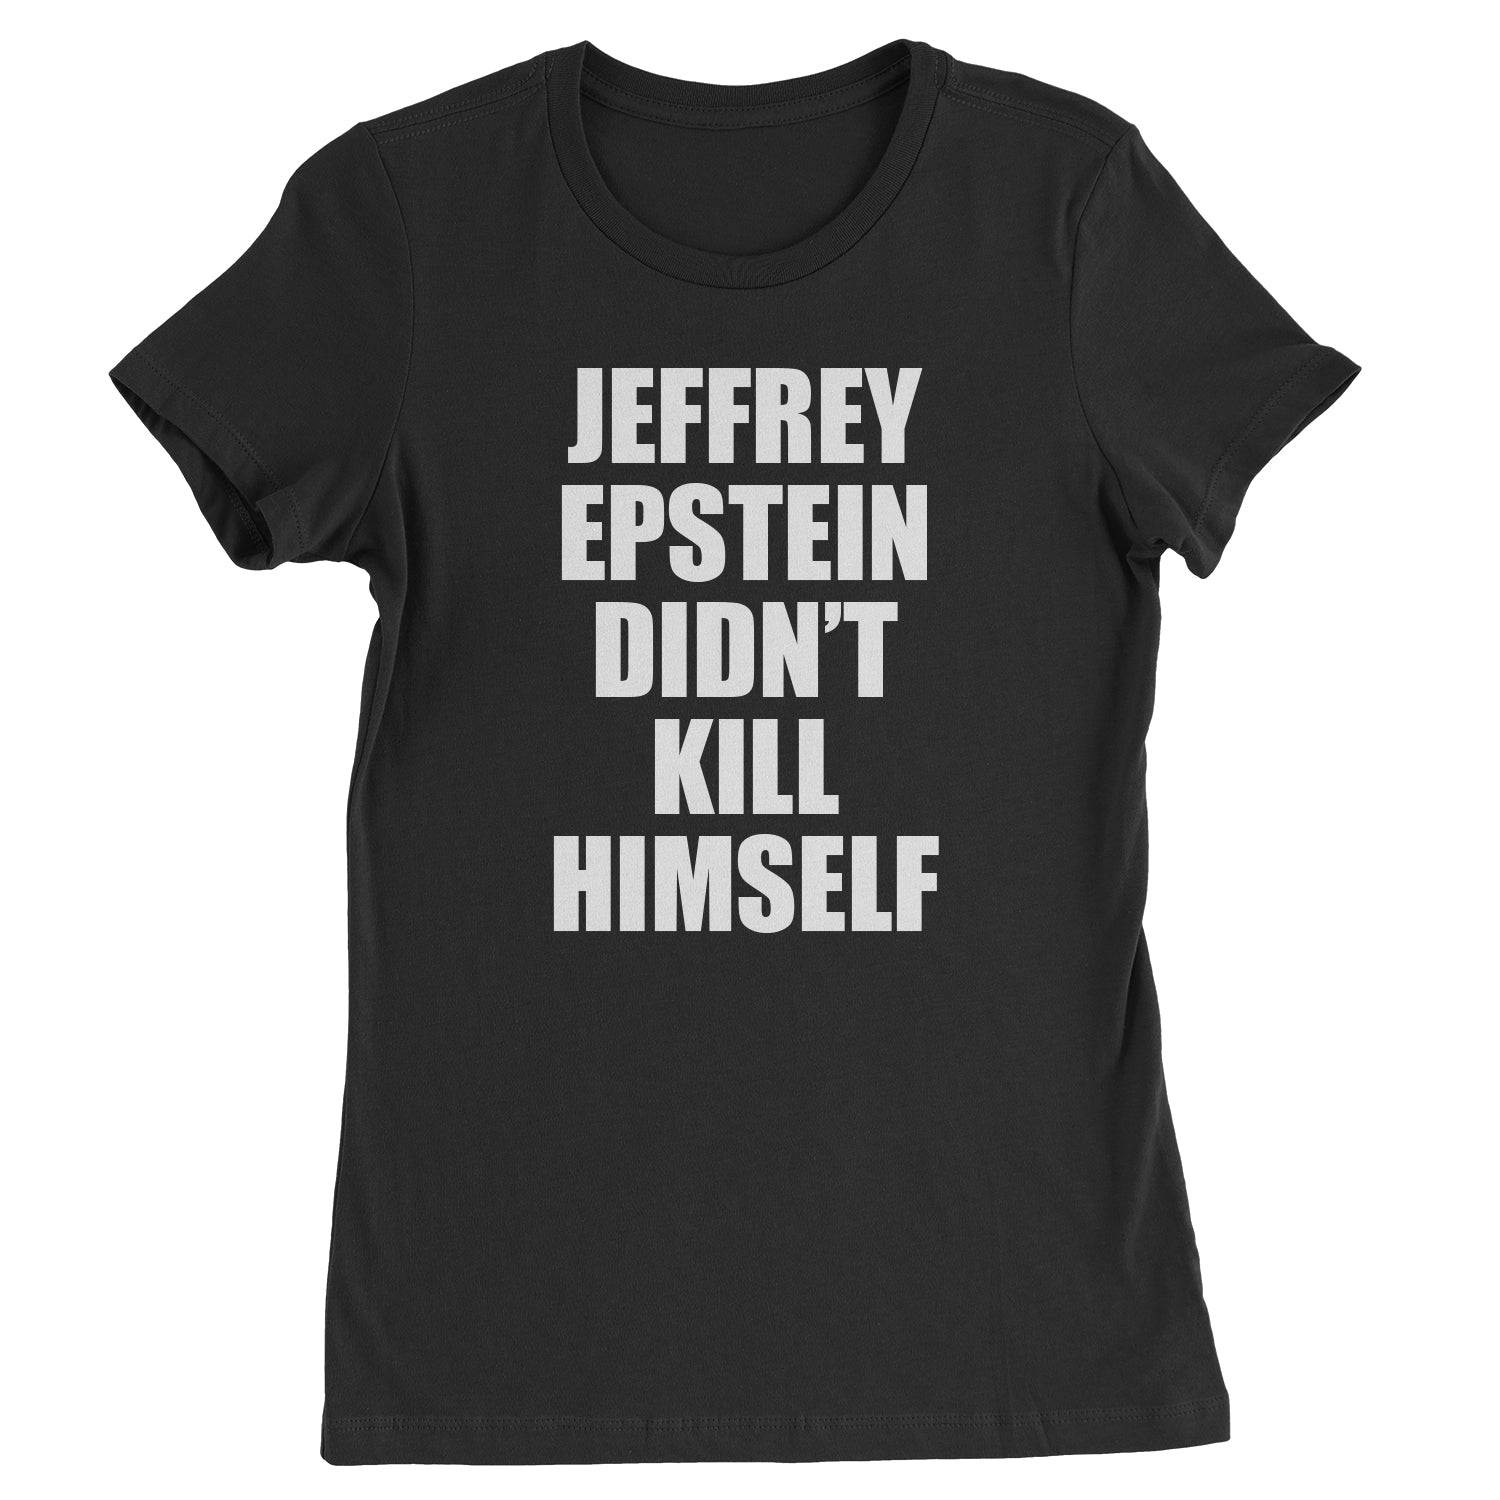 Jeffrey Epstein Didn't Kill Himself Womens T-shirt coverup, homicide, murder, ssadgk, trump by Expression Tees